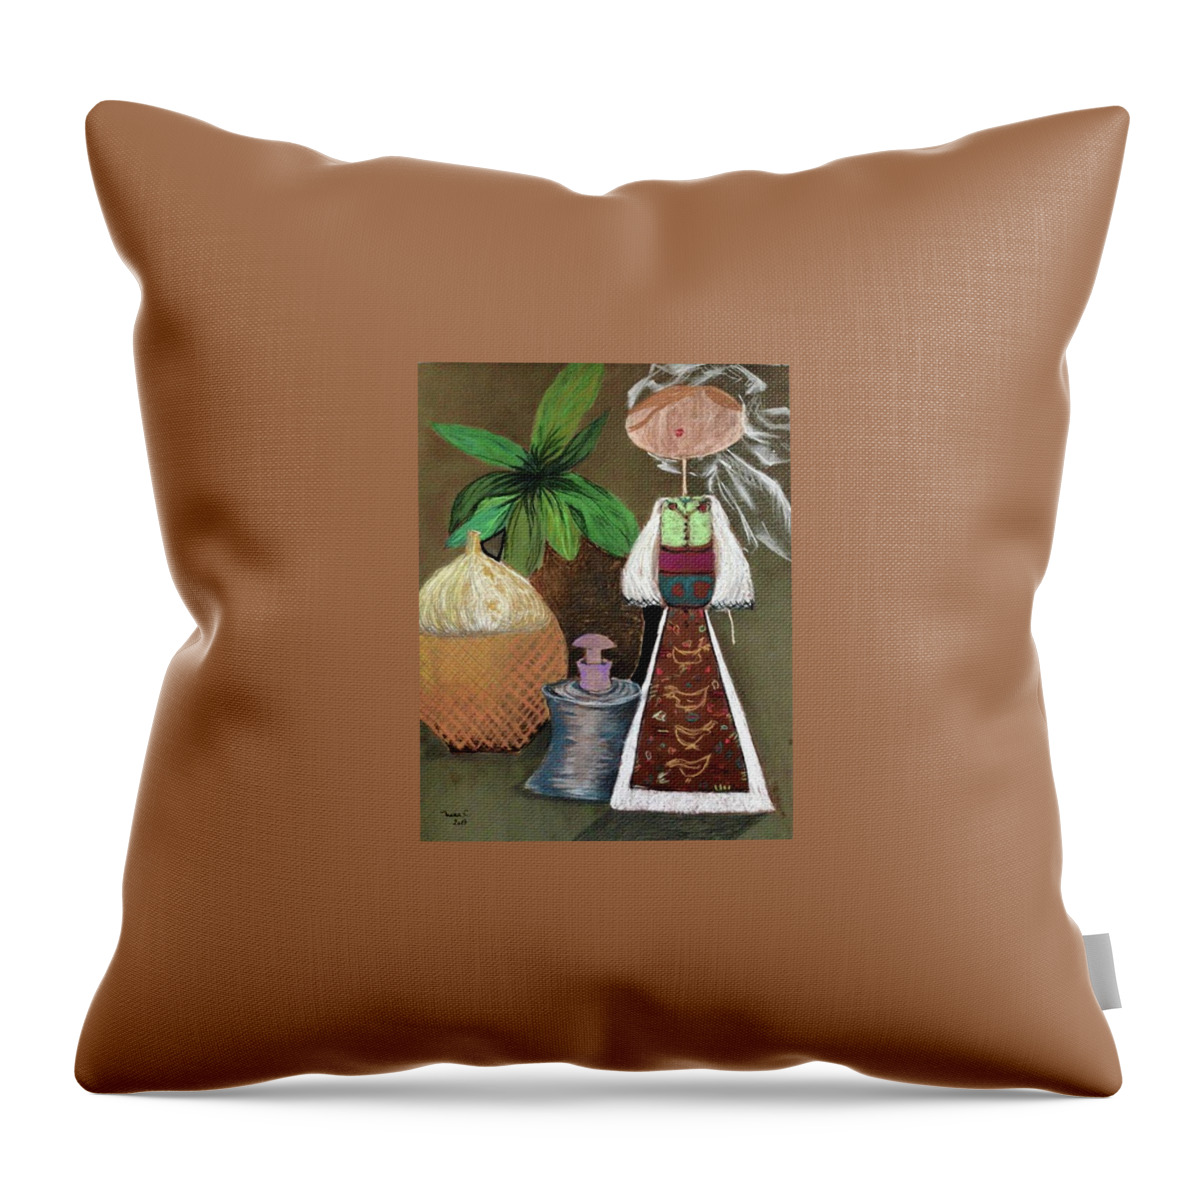 Country Throw Pillow featuring the pastel Still life with countru girl by Manuela Constantin